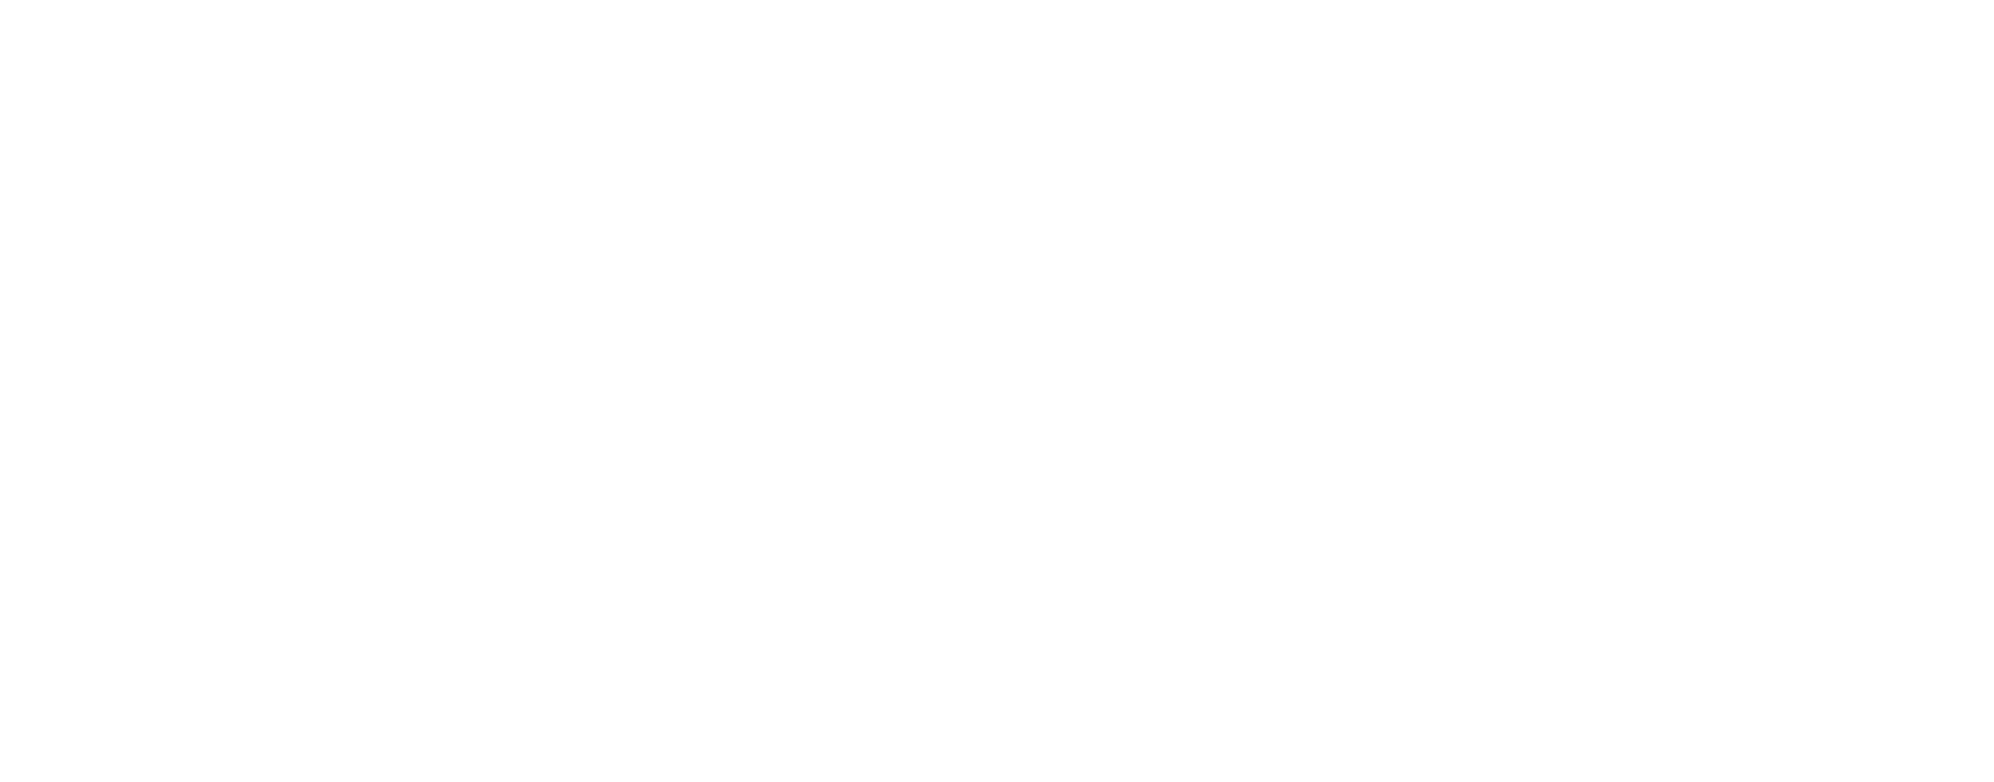 OpenFF Toolkit 0.14.3+16.g88ce0b3.dirty documentation logo